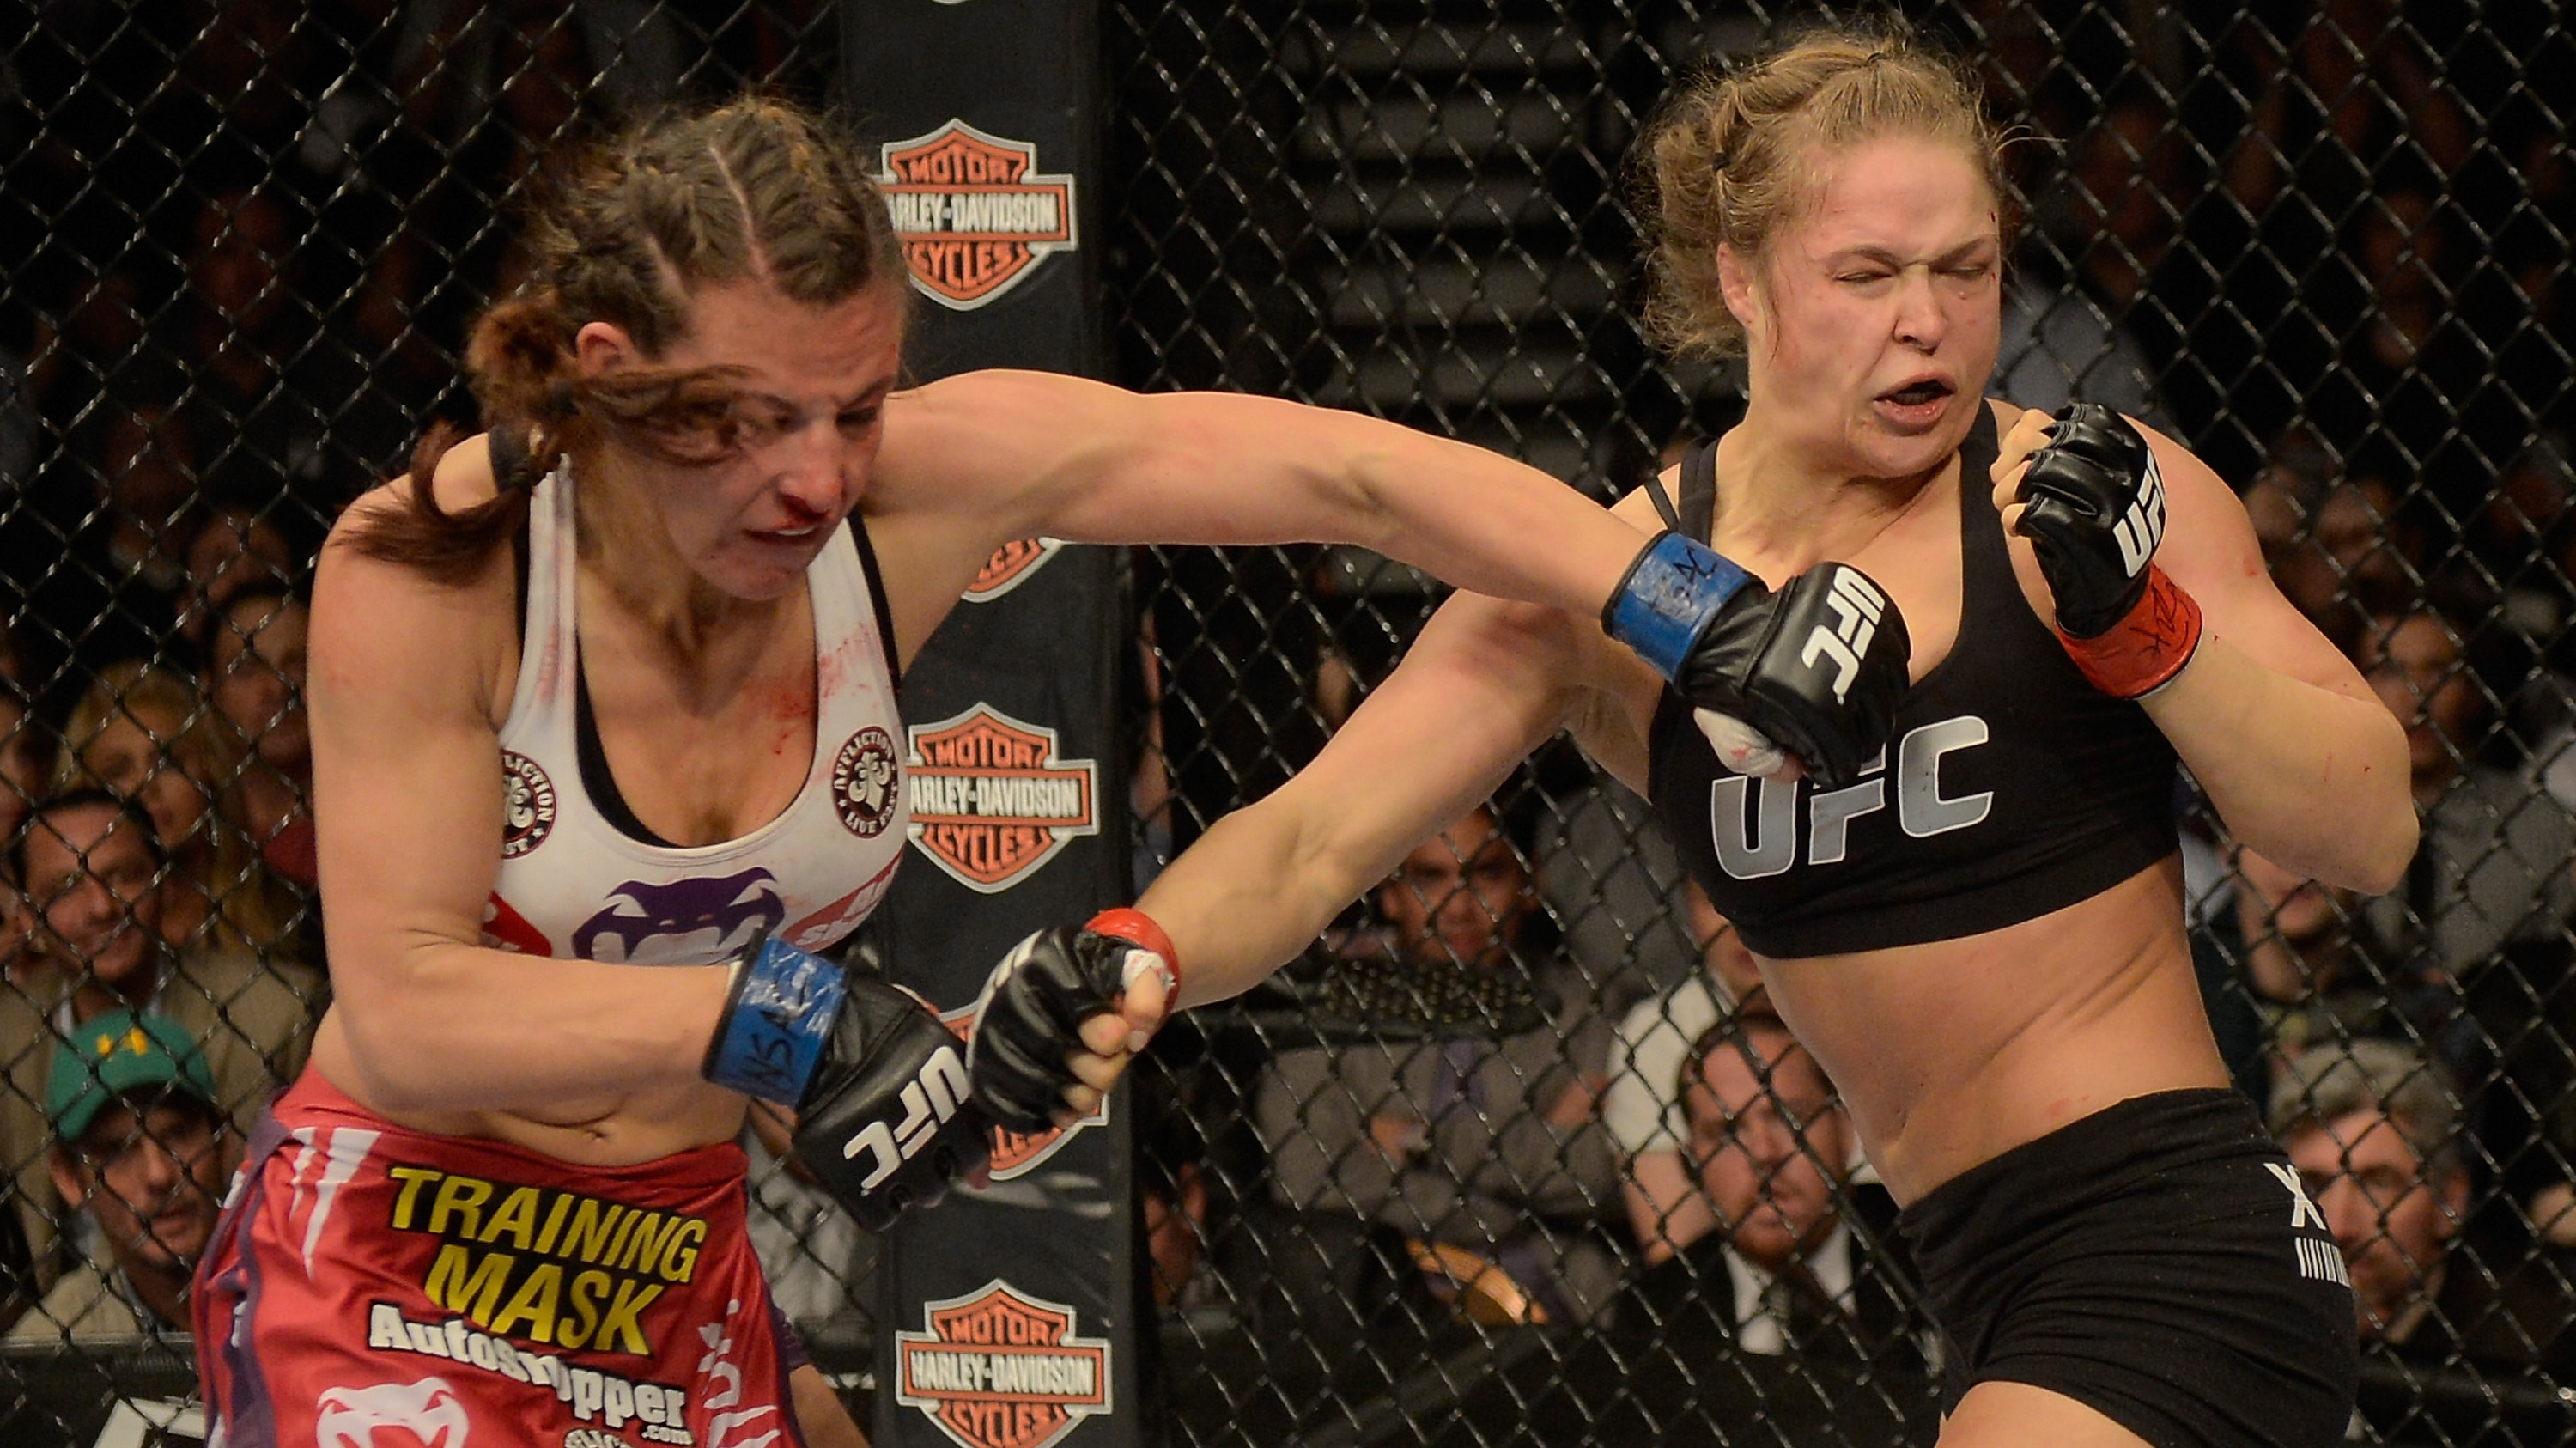 Tate in action in her second fight vs Rousey (Photo by Donald Miralle/Zuffa LLC/Zuffa LLC via Getty Images)